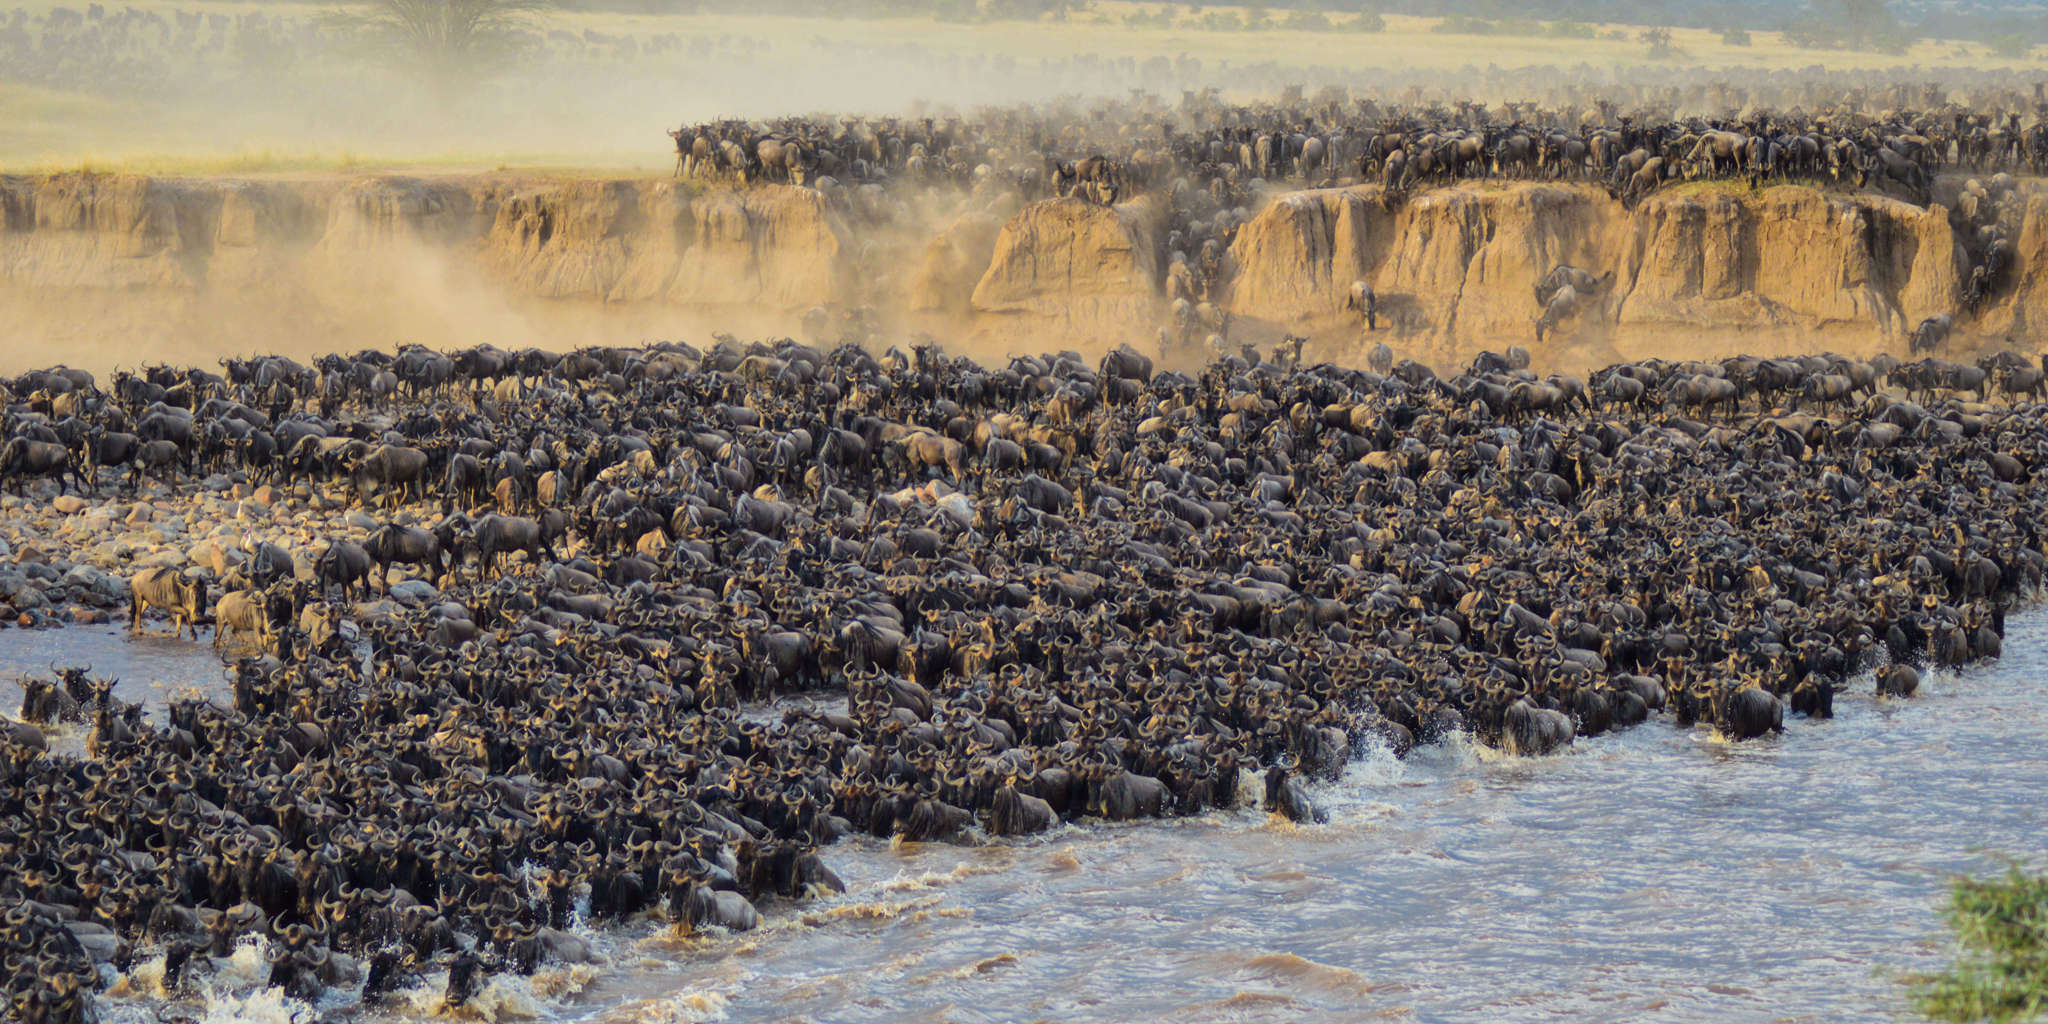 The Serengeti Great Migration - August 